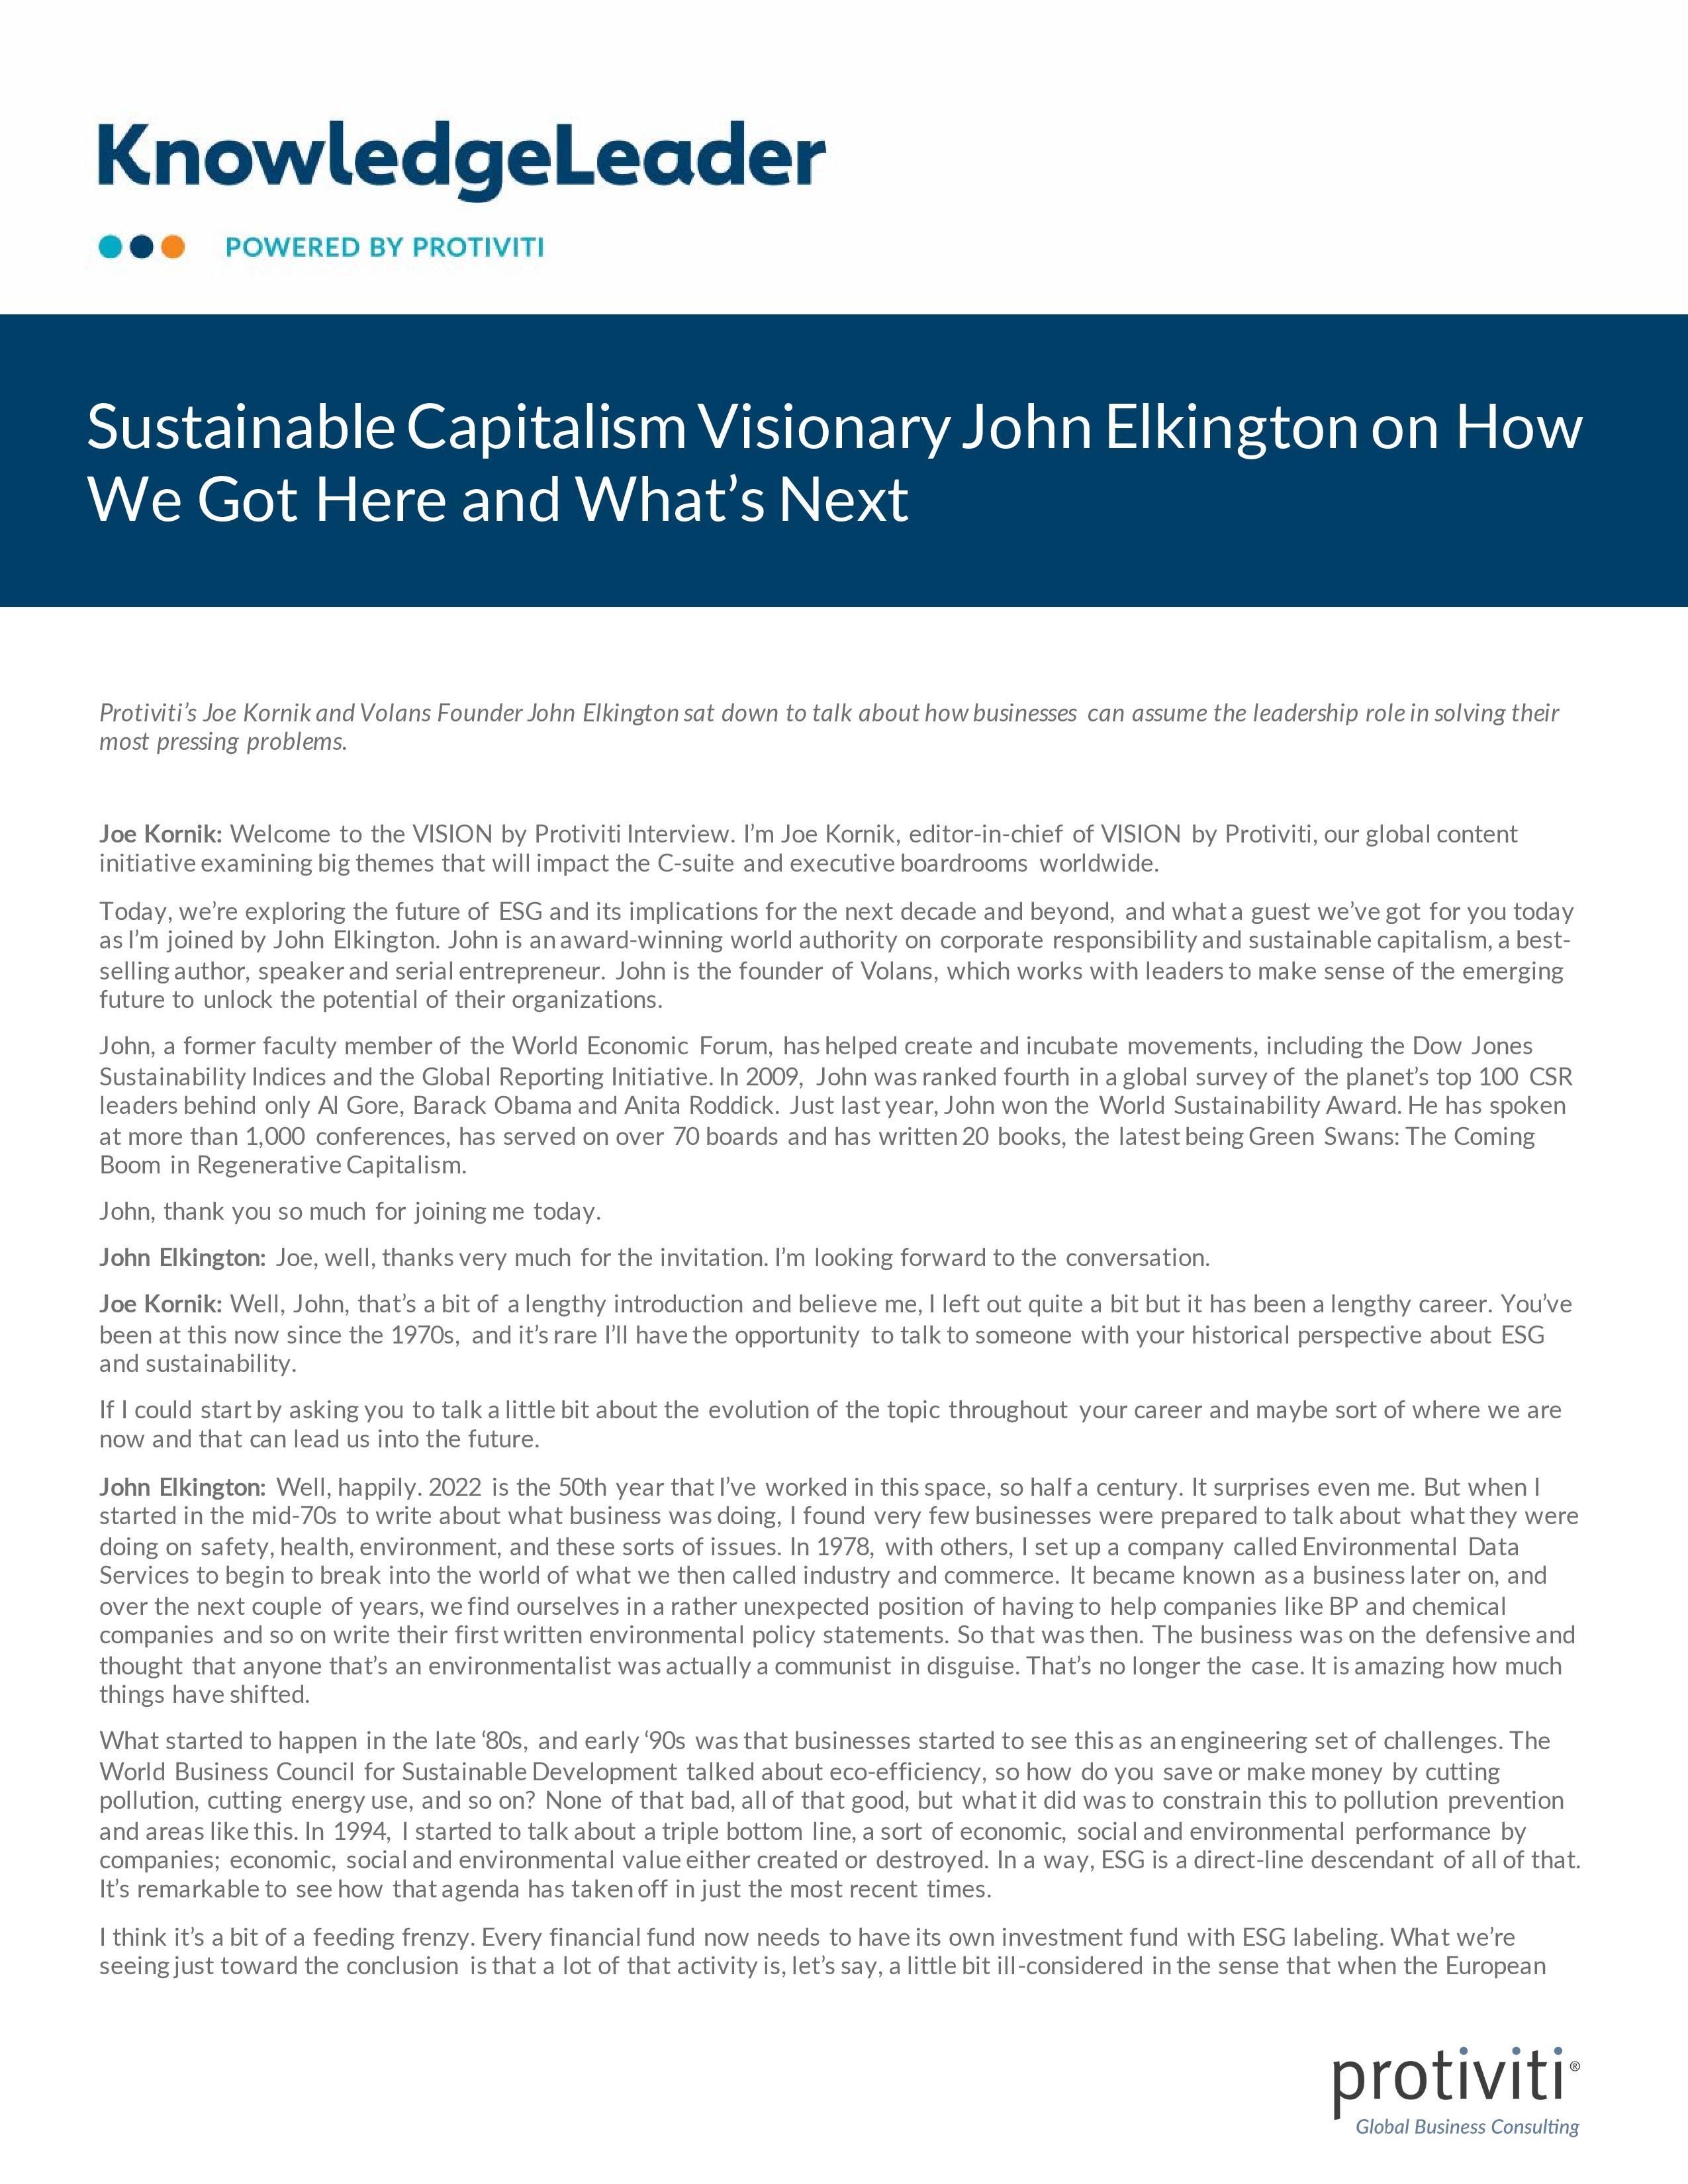 Screenshot of the First Page of Sustainable Capitalism Visionary John Elkington on How We Got Here and What’s Next